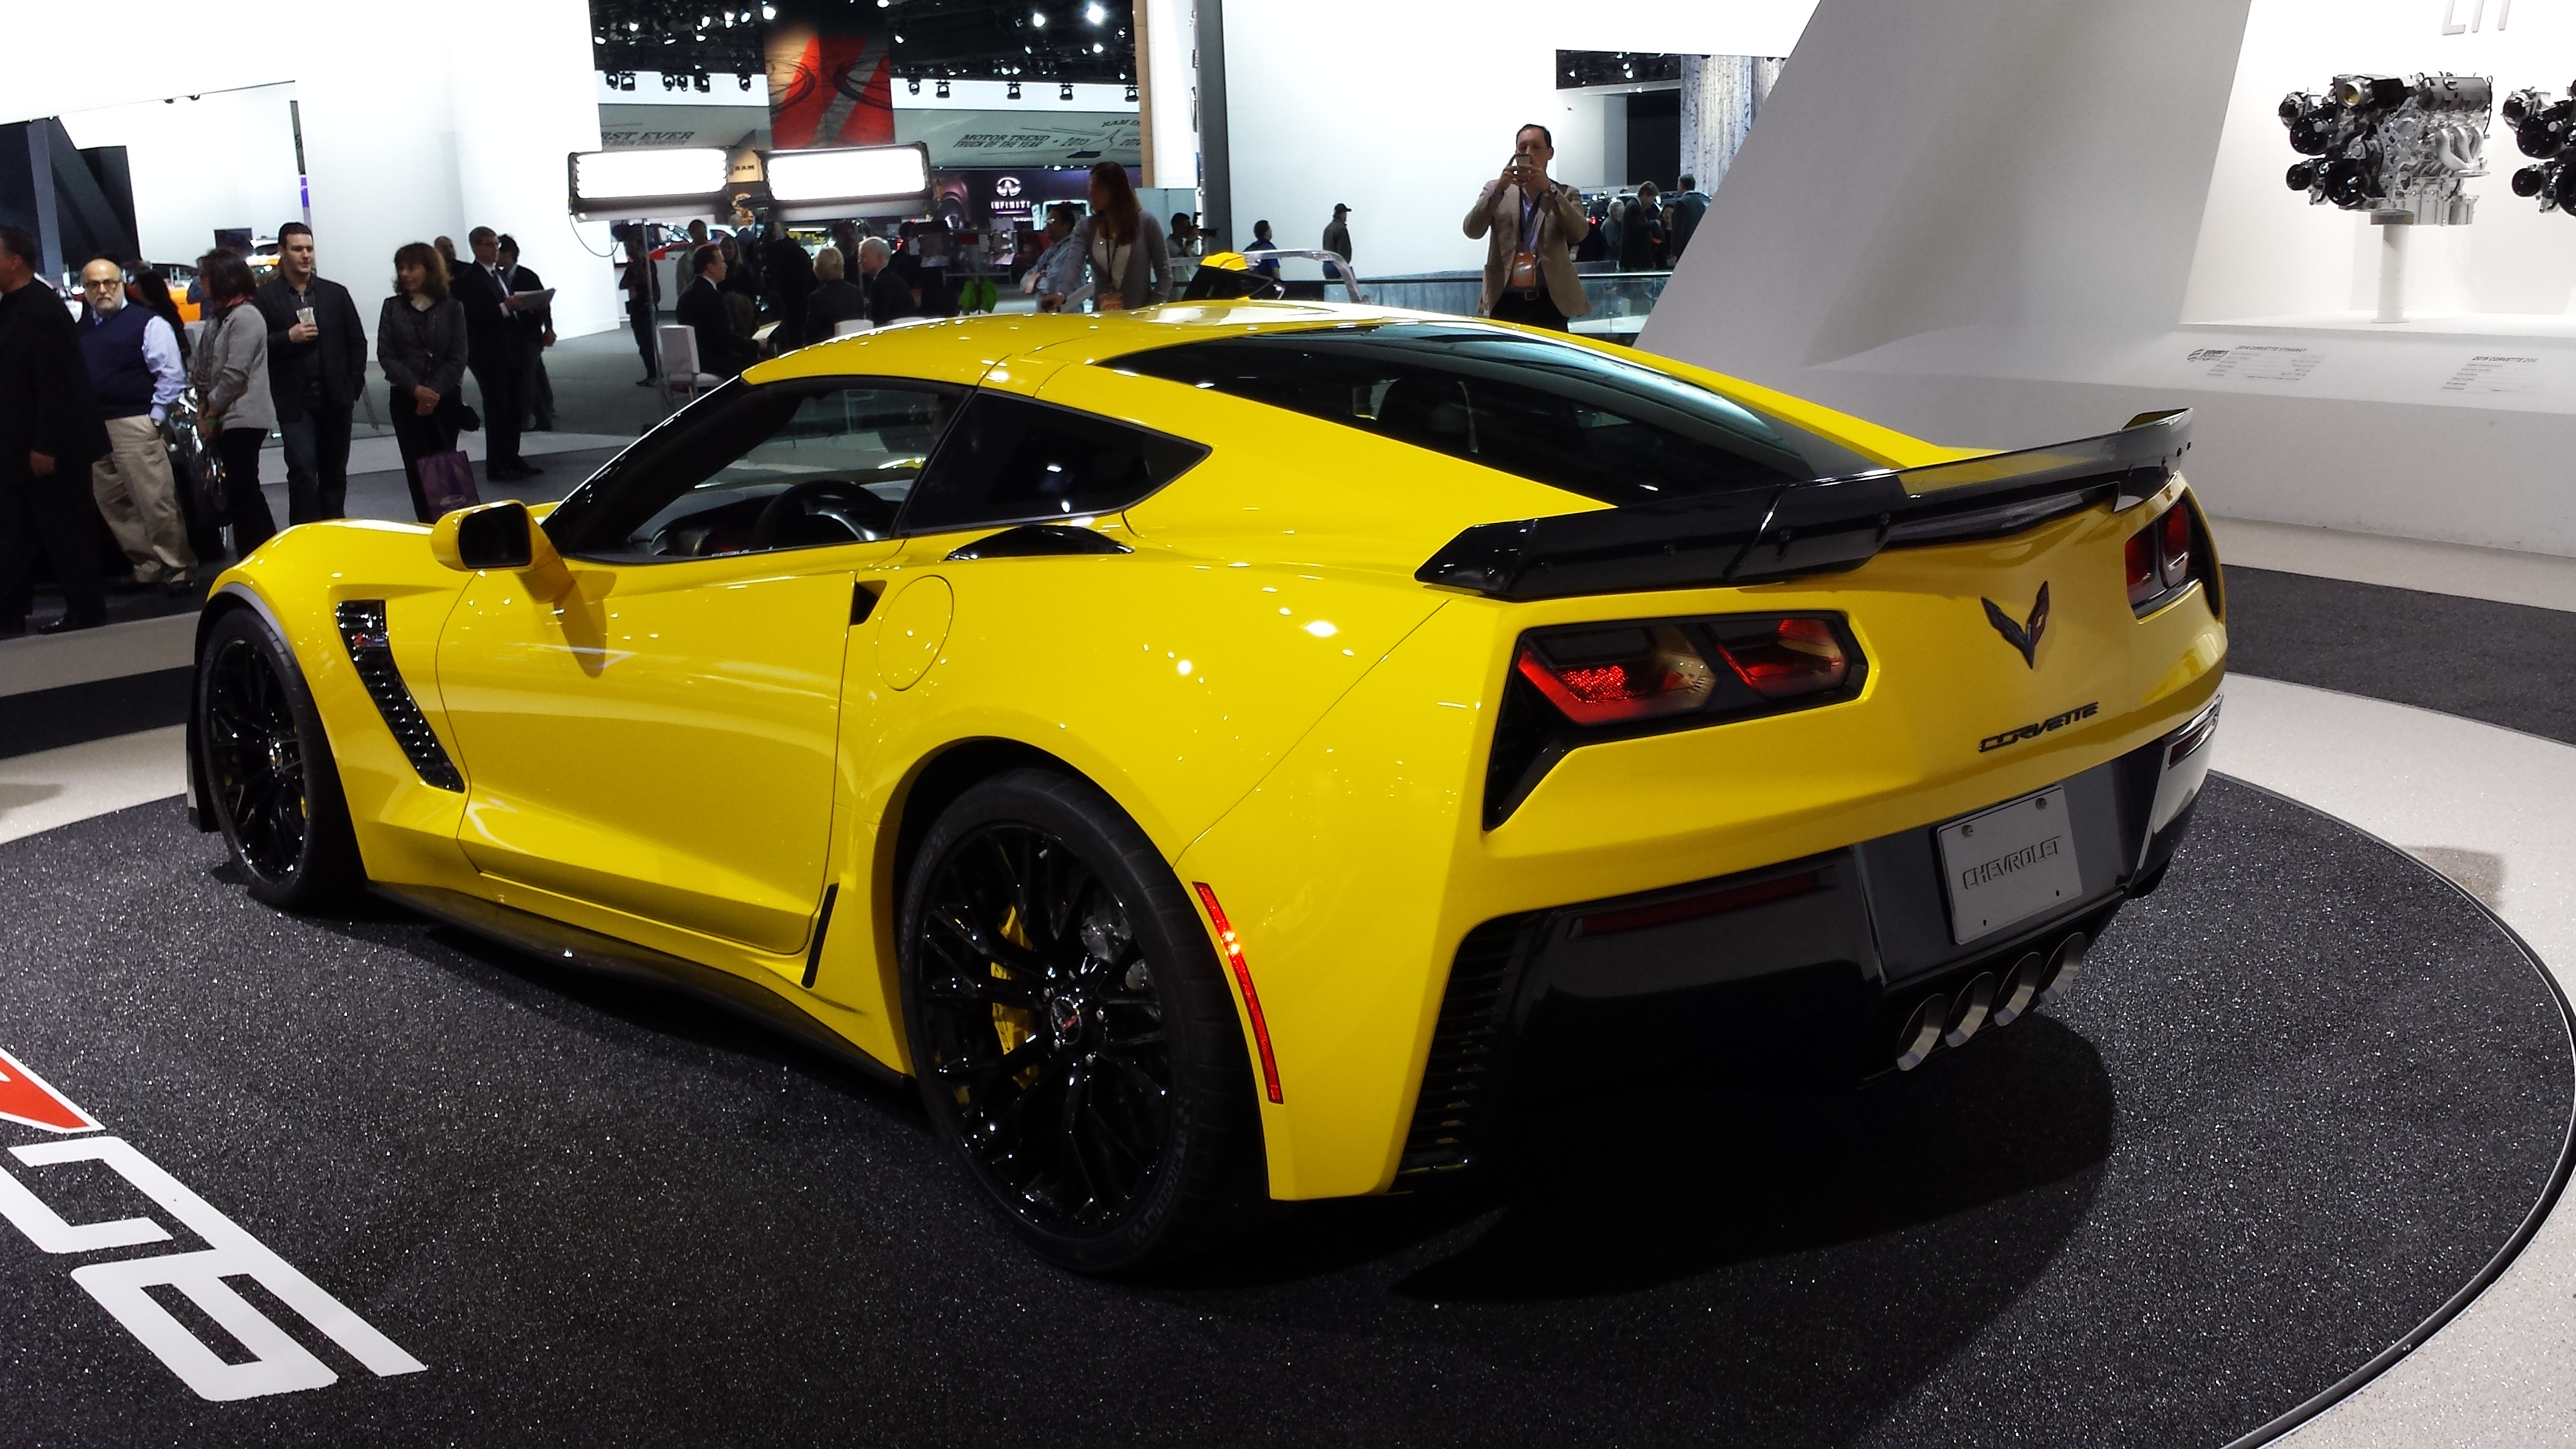 Corvette Stingray Wallpaper HD Very Suitable As A For